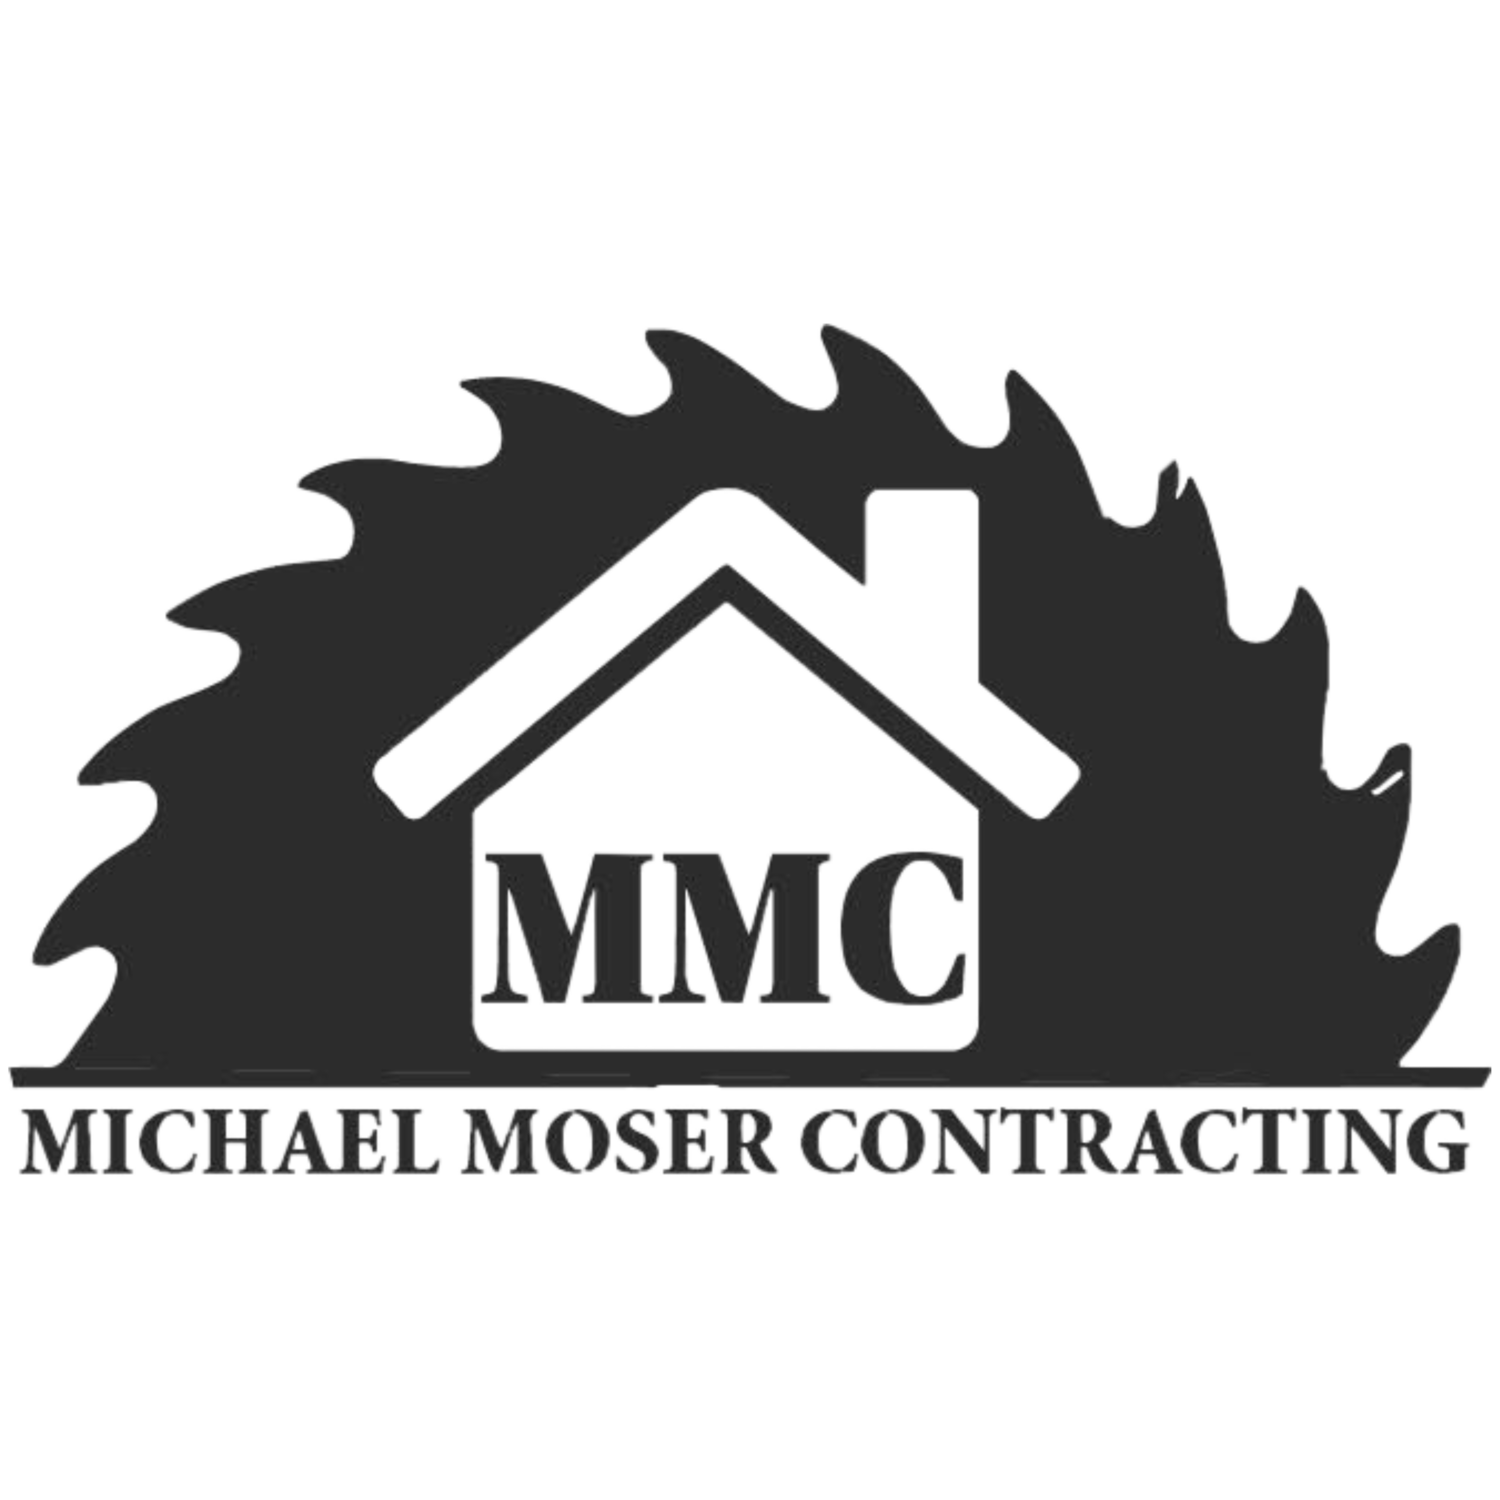 MICHAEL MOSER CONTRACTING